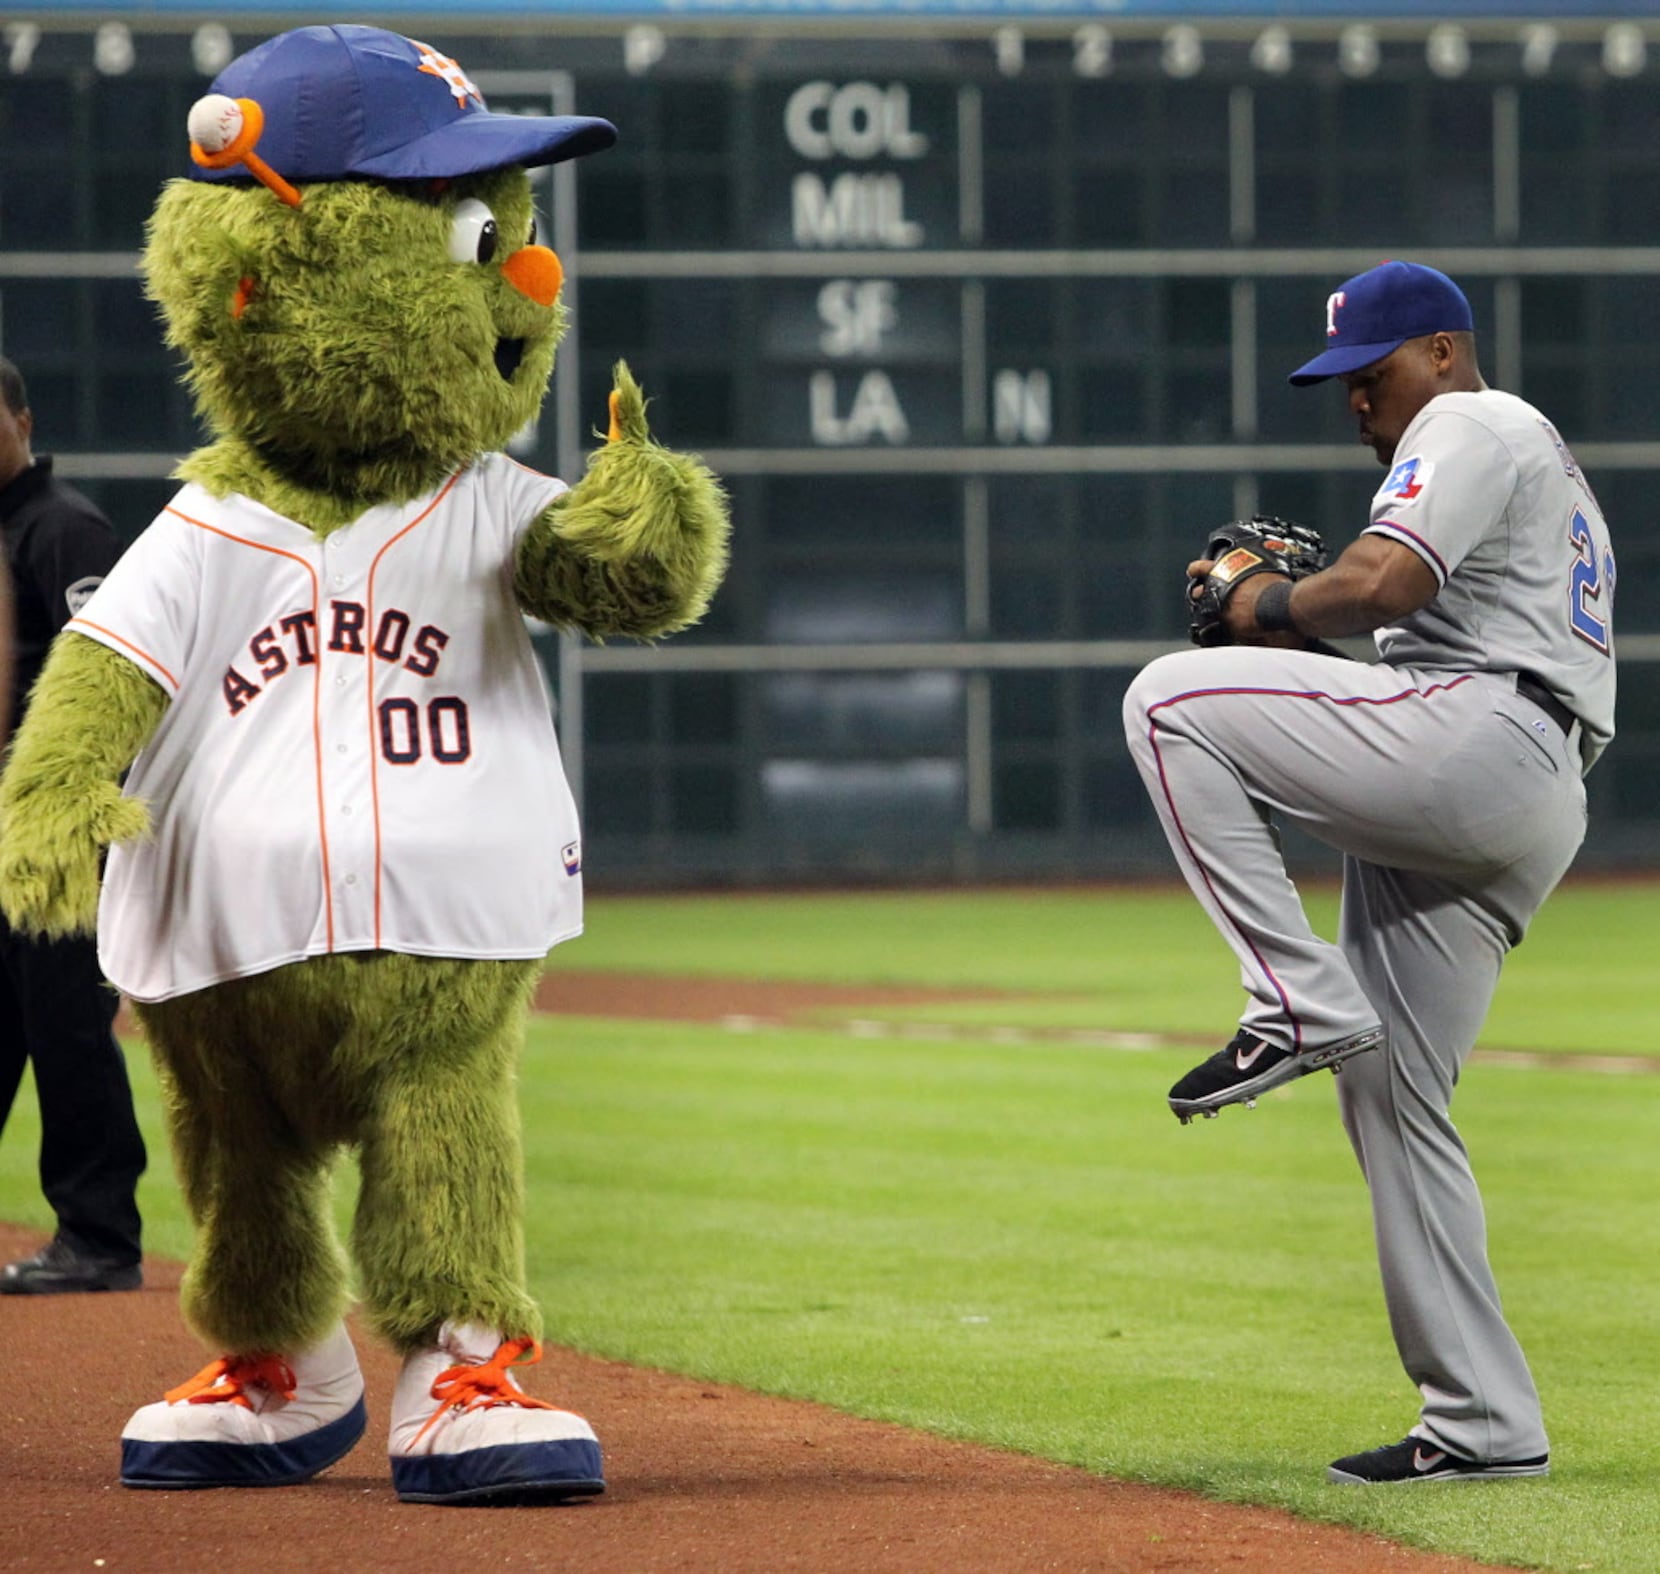 Want to work with Orbit? The Astros are hiring!